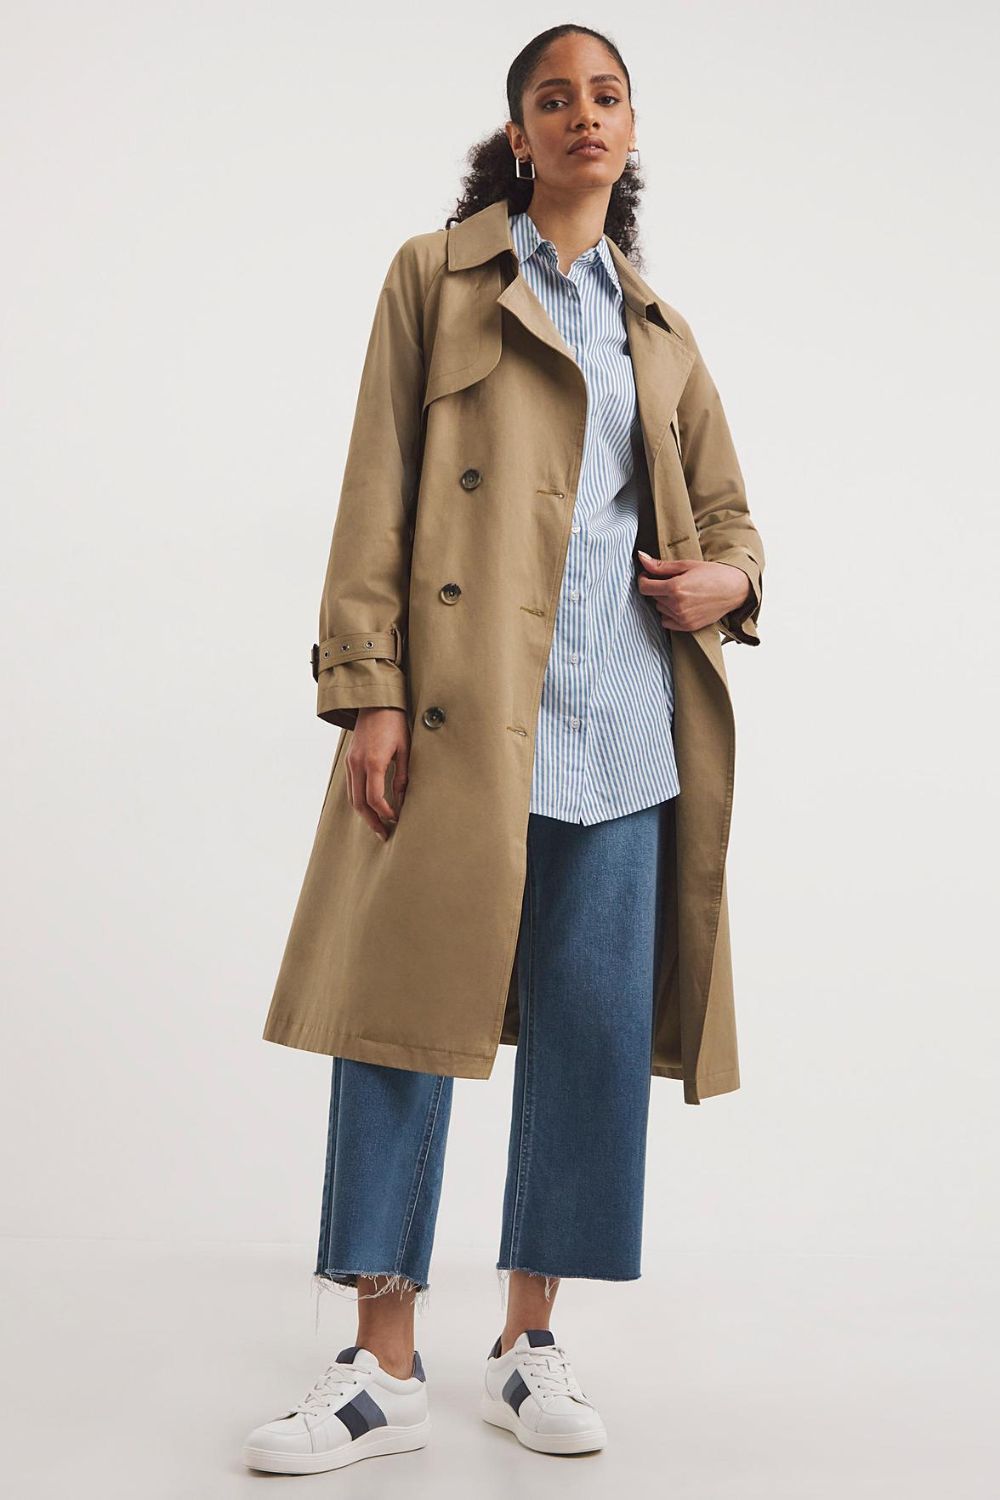 These Are The Best Trench Coats To Shop Now – Starting From €69.99 ...